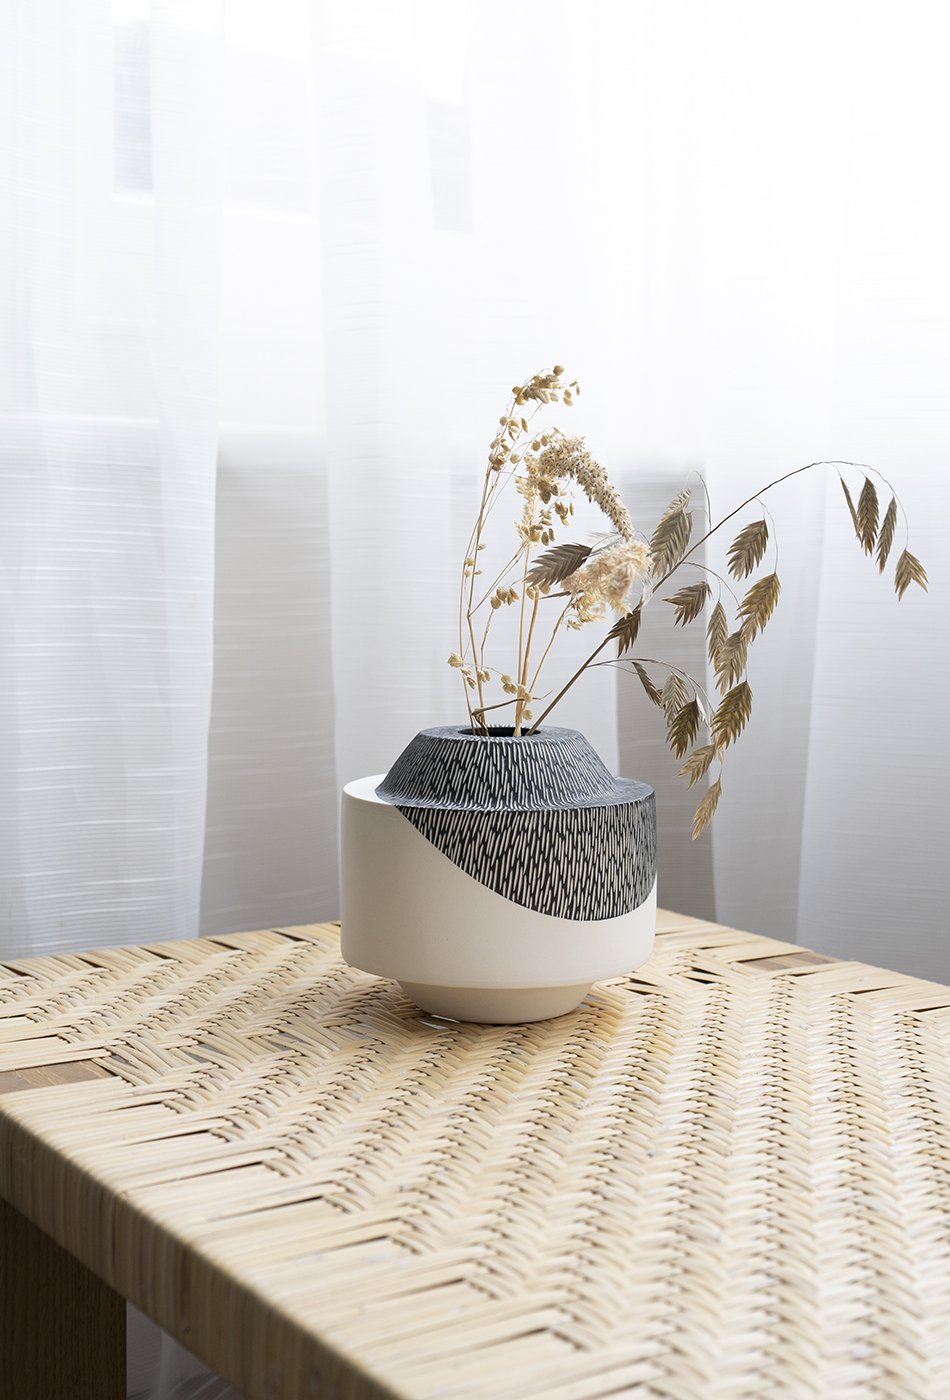 A carved monochrome black and white ceramic vase made by British ceramist Sophie Bland sits on top of a woven rattan table bench designed by Børge Mogensen. 